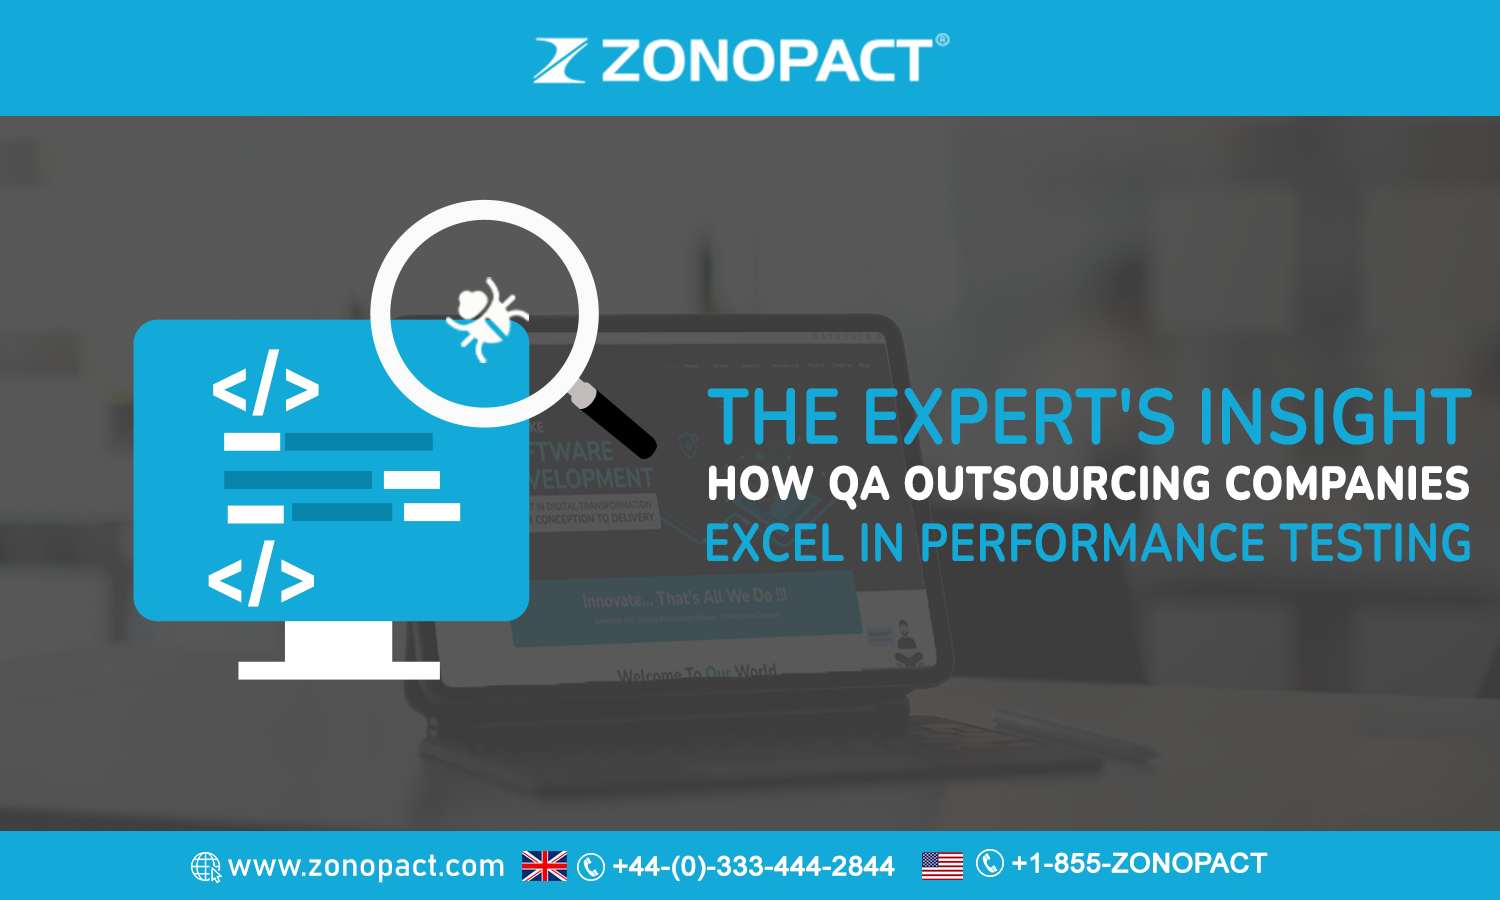 The Expert's Insight How QA Outsourcing Companies Excel in Performance Testing (1)